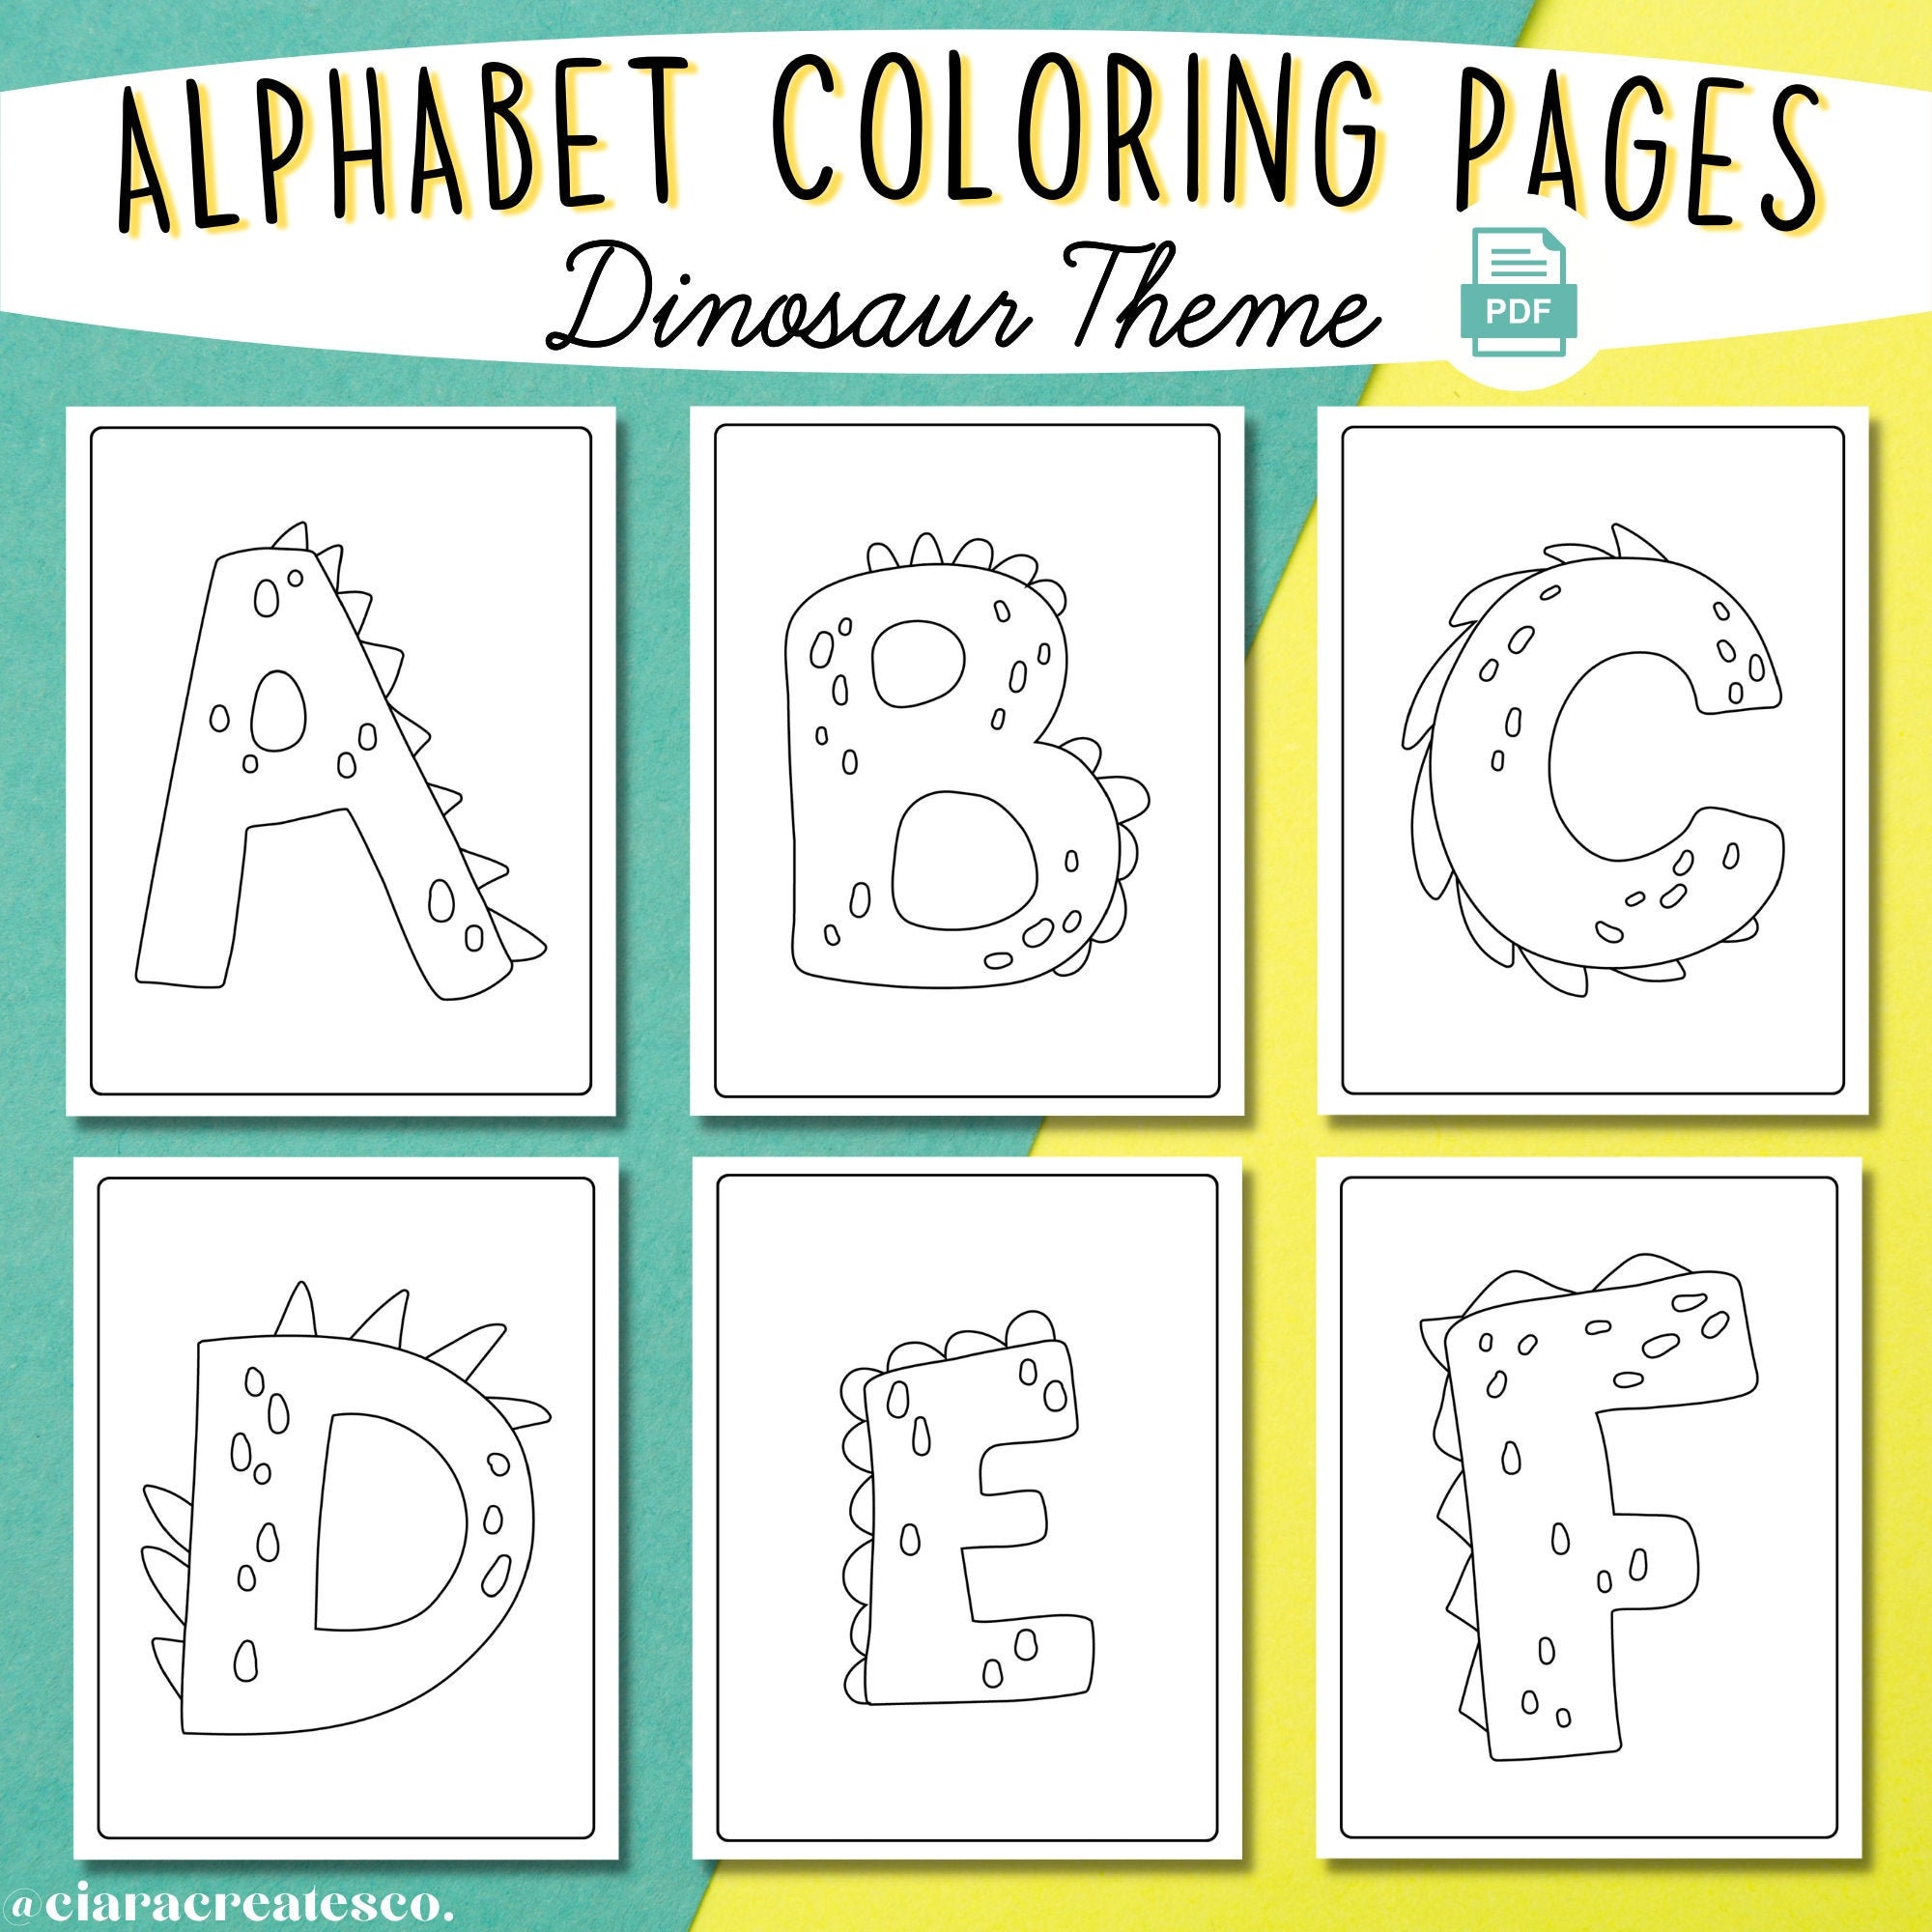 Alphabet coloring pages homeschool activity dinosaur alphabet printable summer activity coloring book coloring pages dinosaur